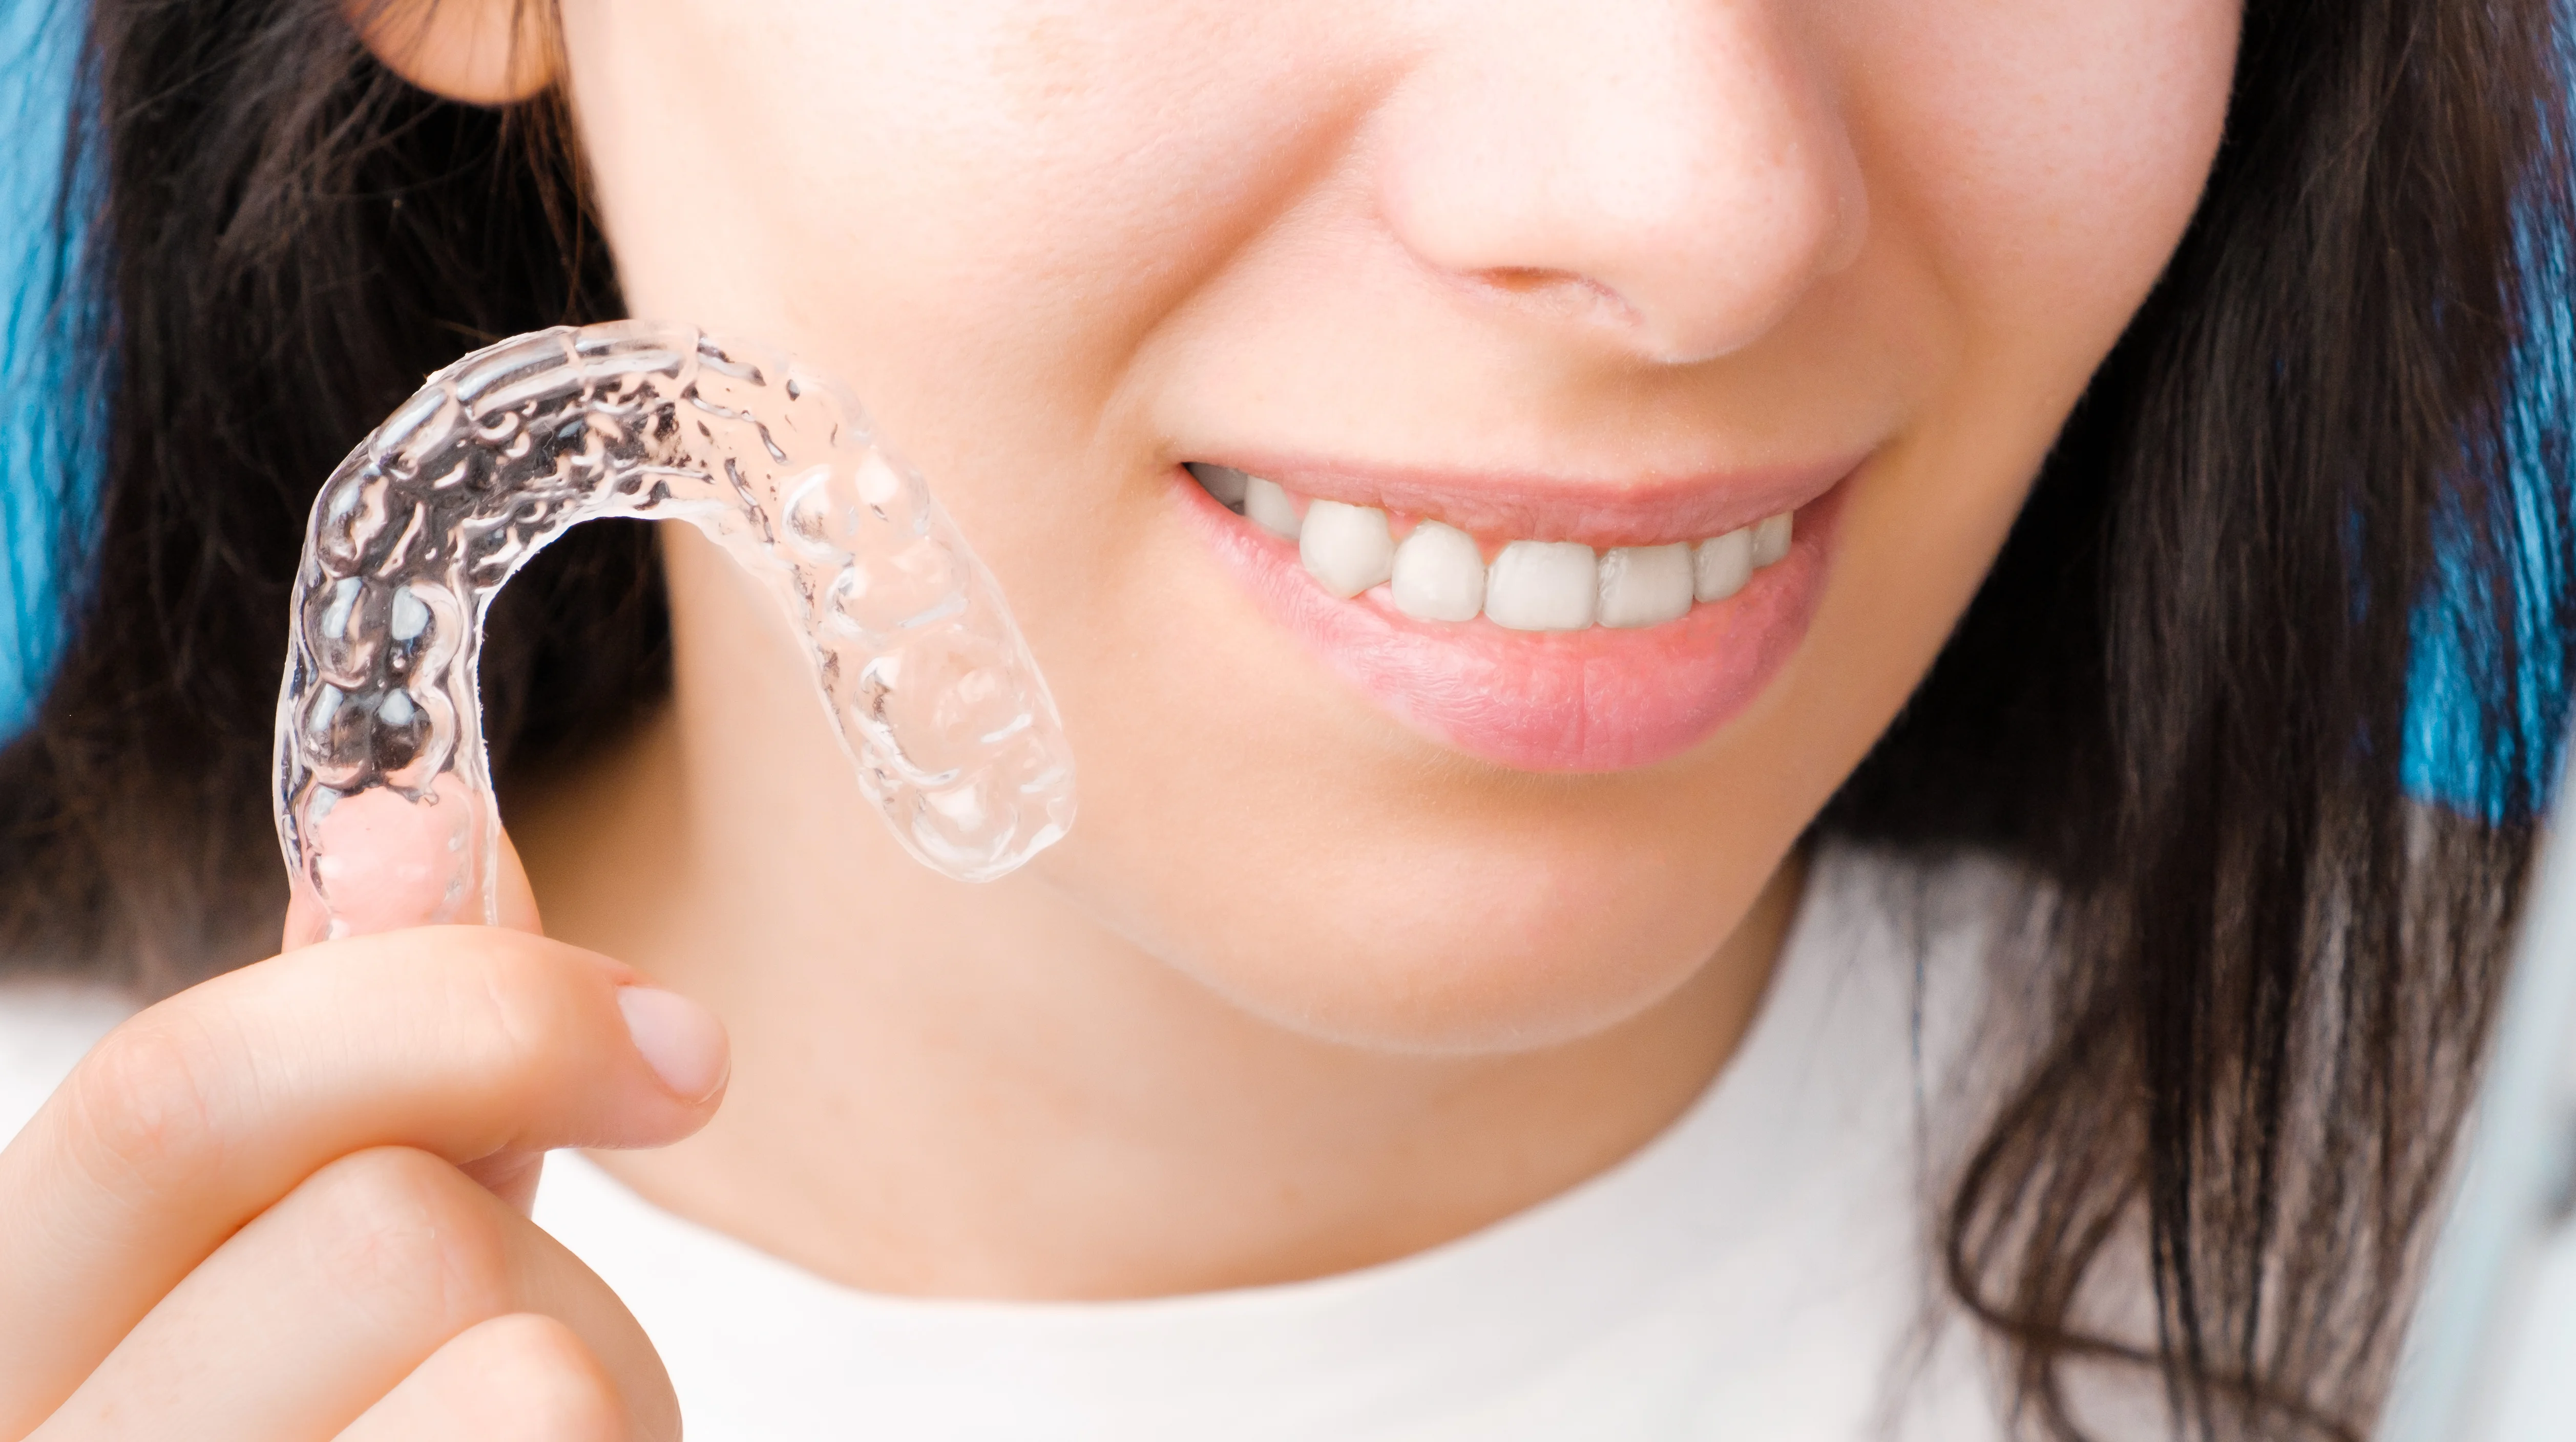 Does Invisalign Cost Less if Your Teeth Aren't Bad